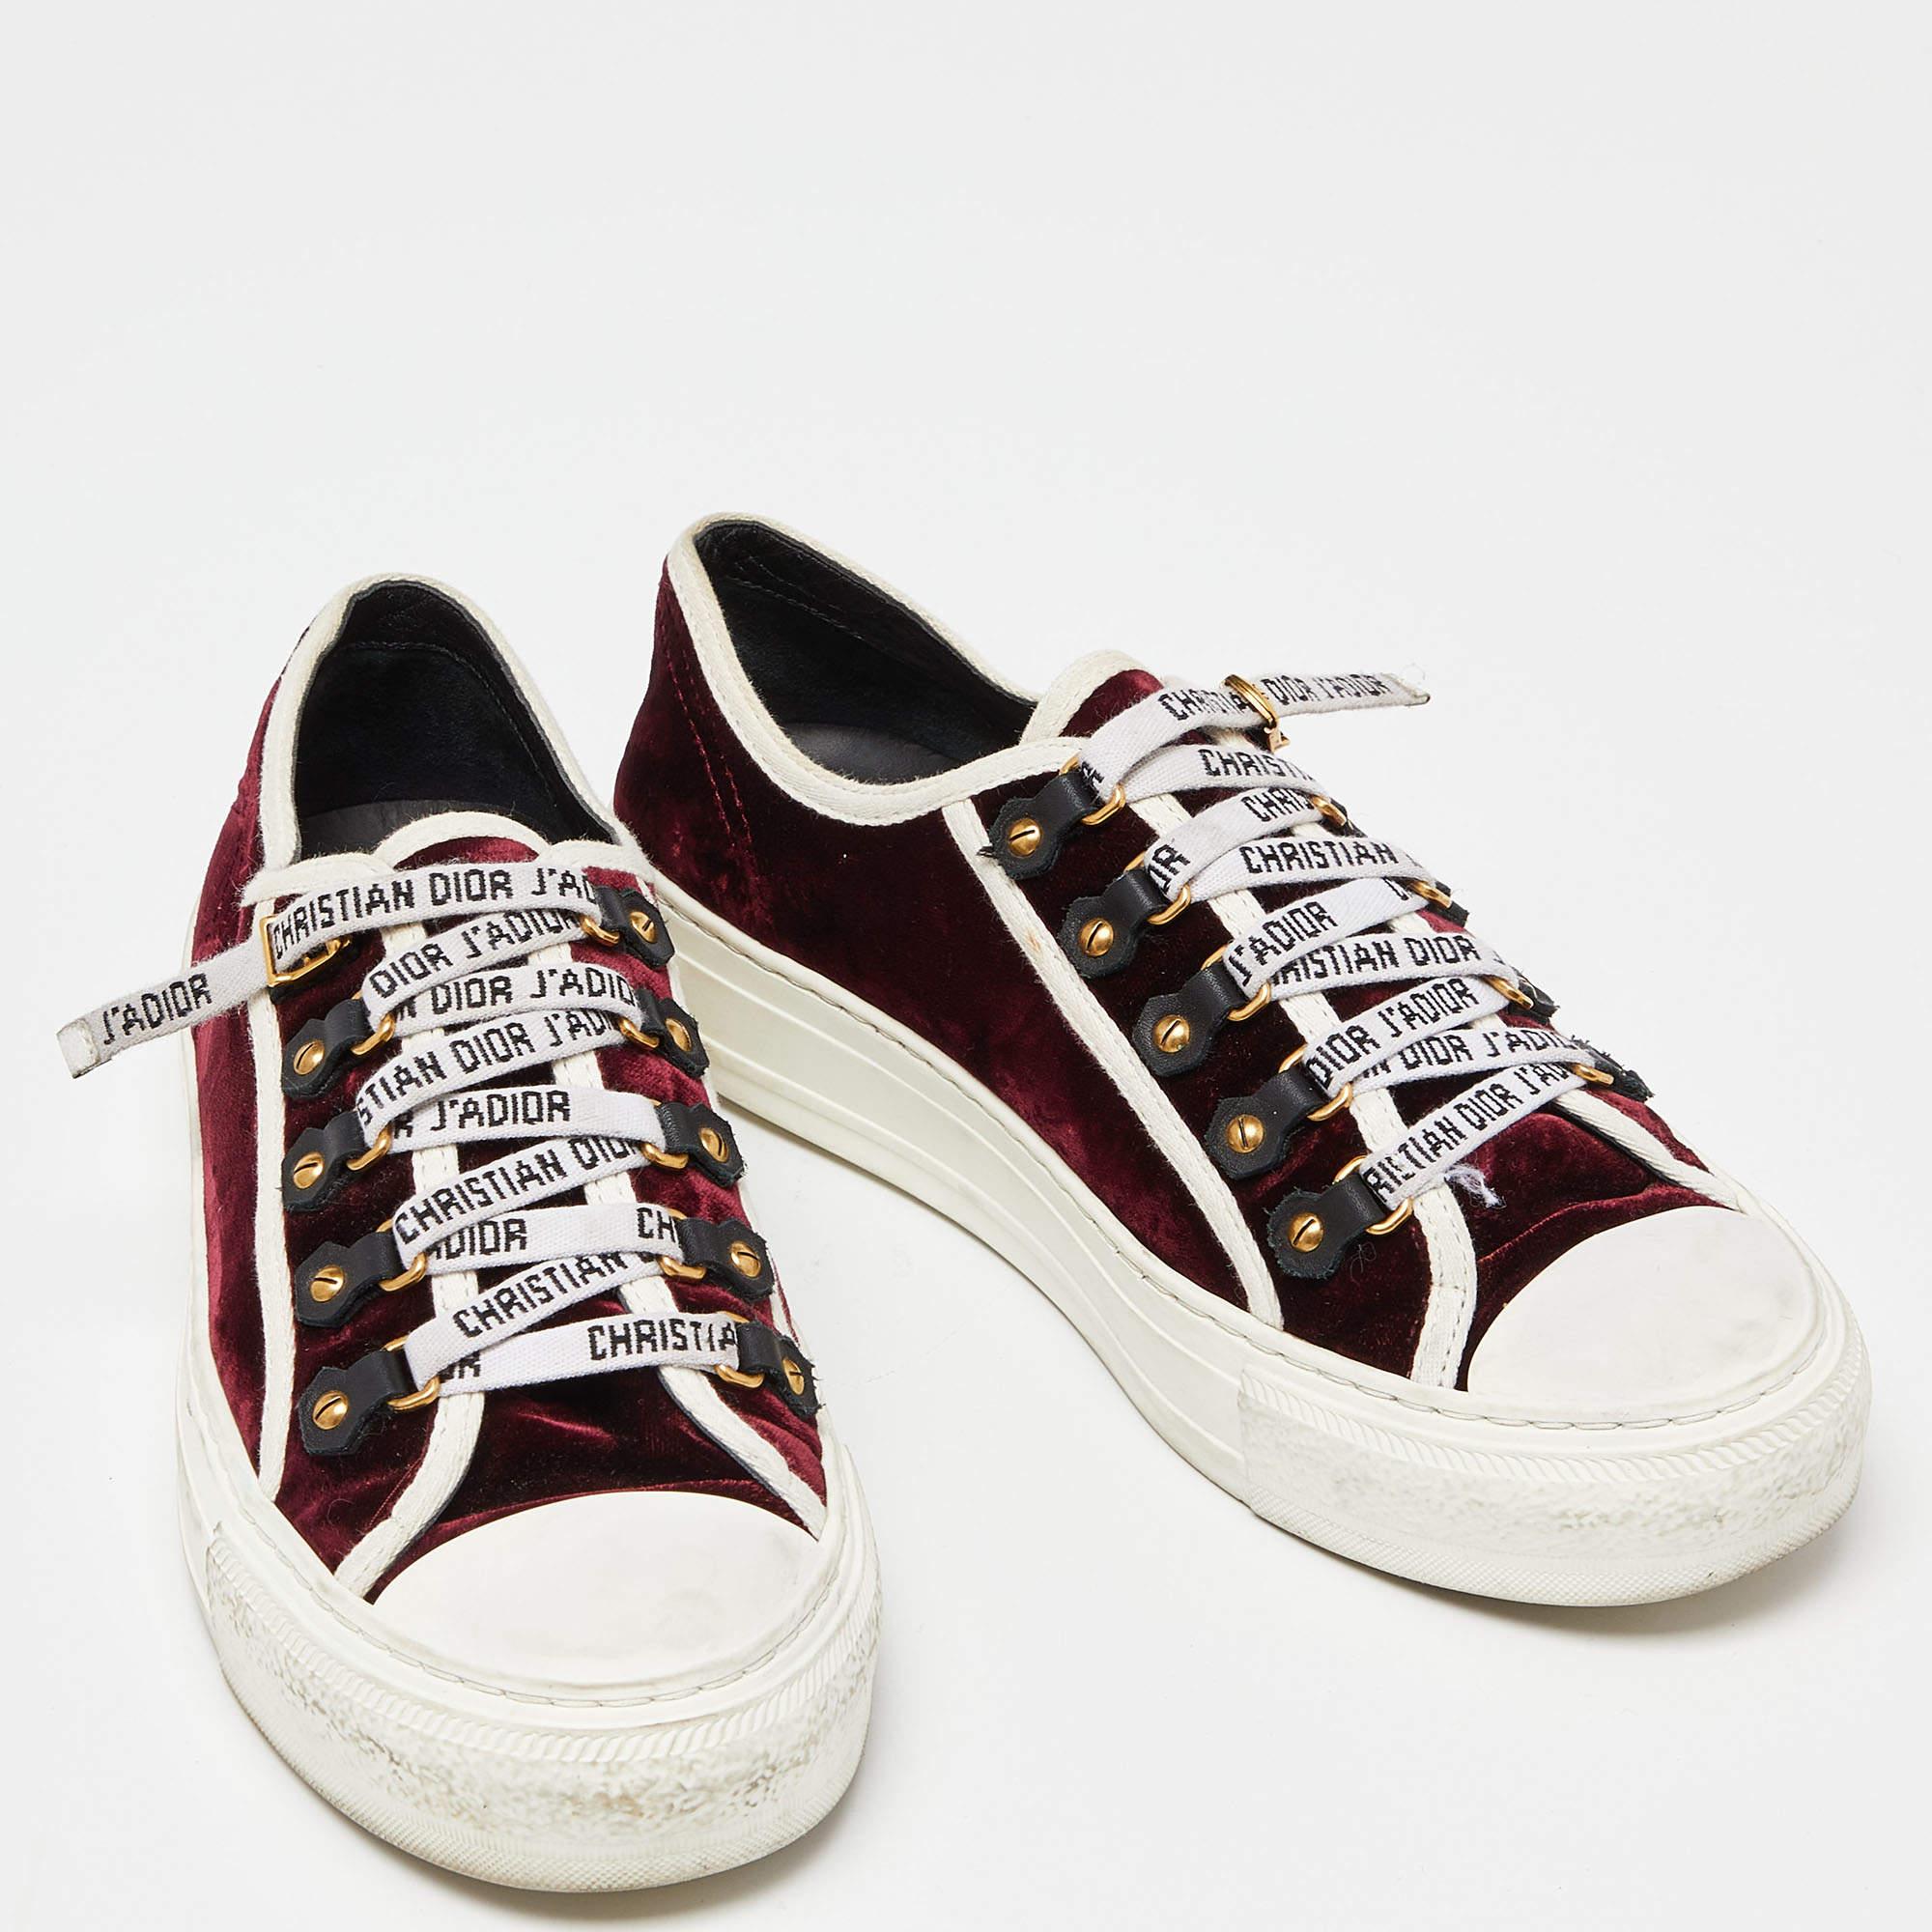 Dior Burgundy/White Velvet and Rubber Walk'n'Dior Sneakers Size 38.5 1